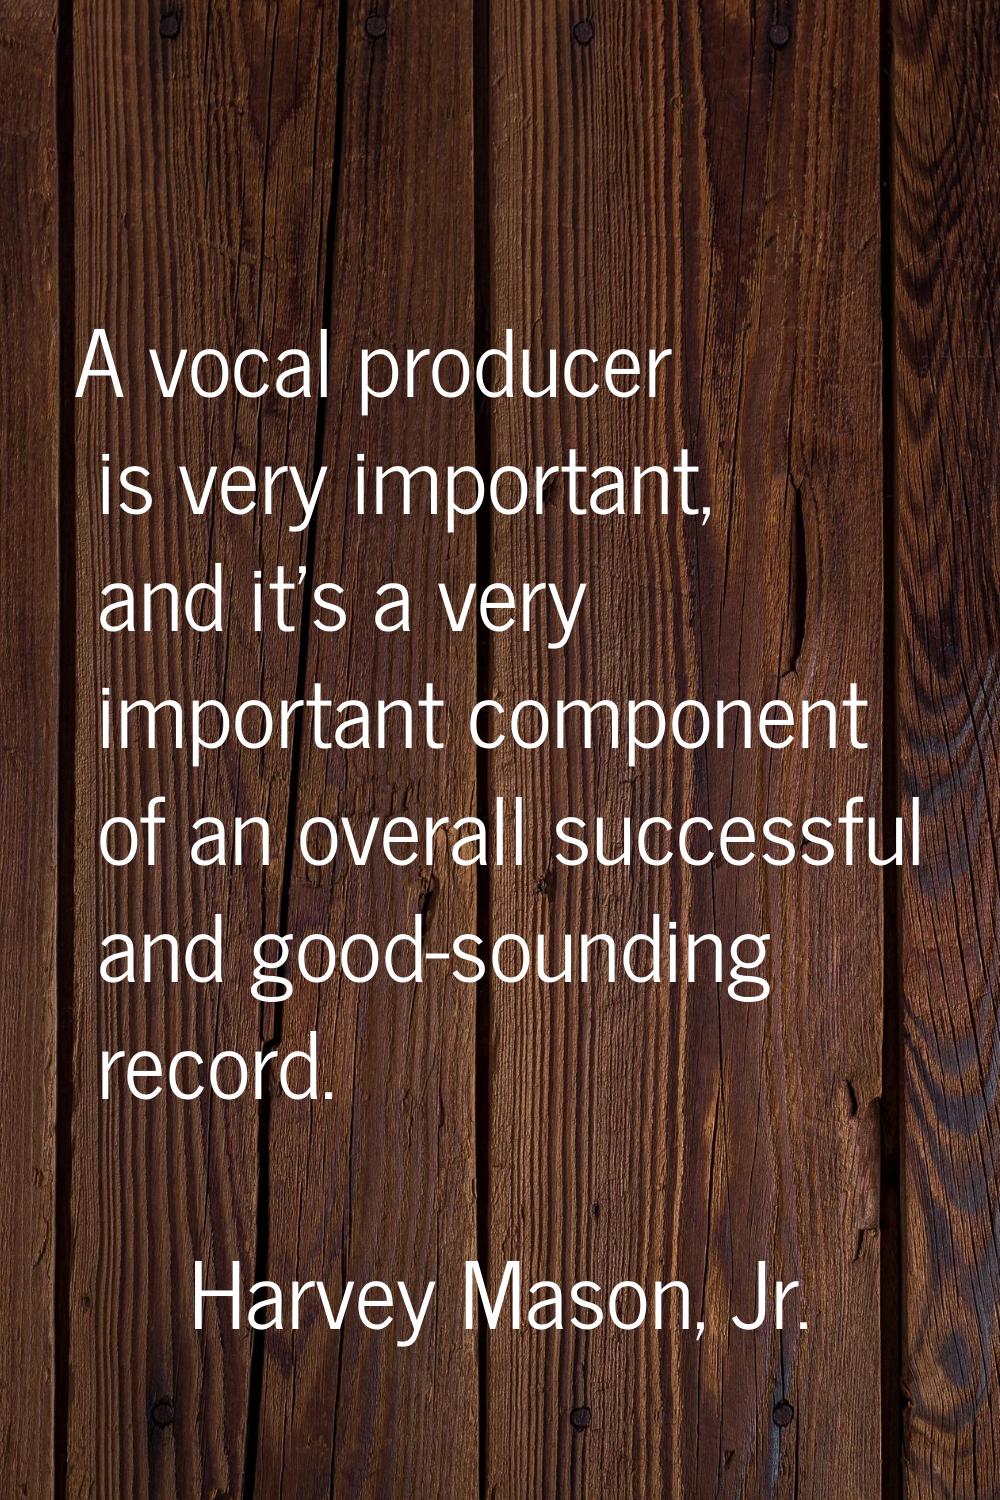 A vocal producer is very important, and it's a very important component of an overall successful an